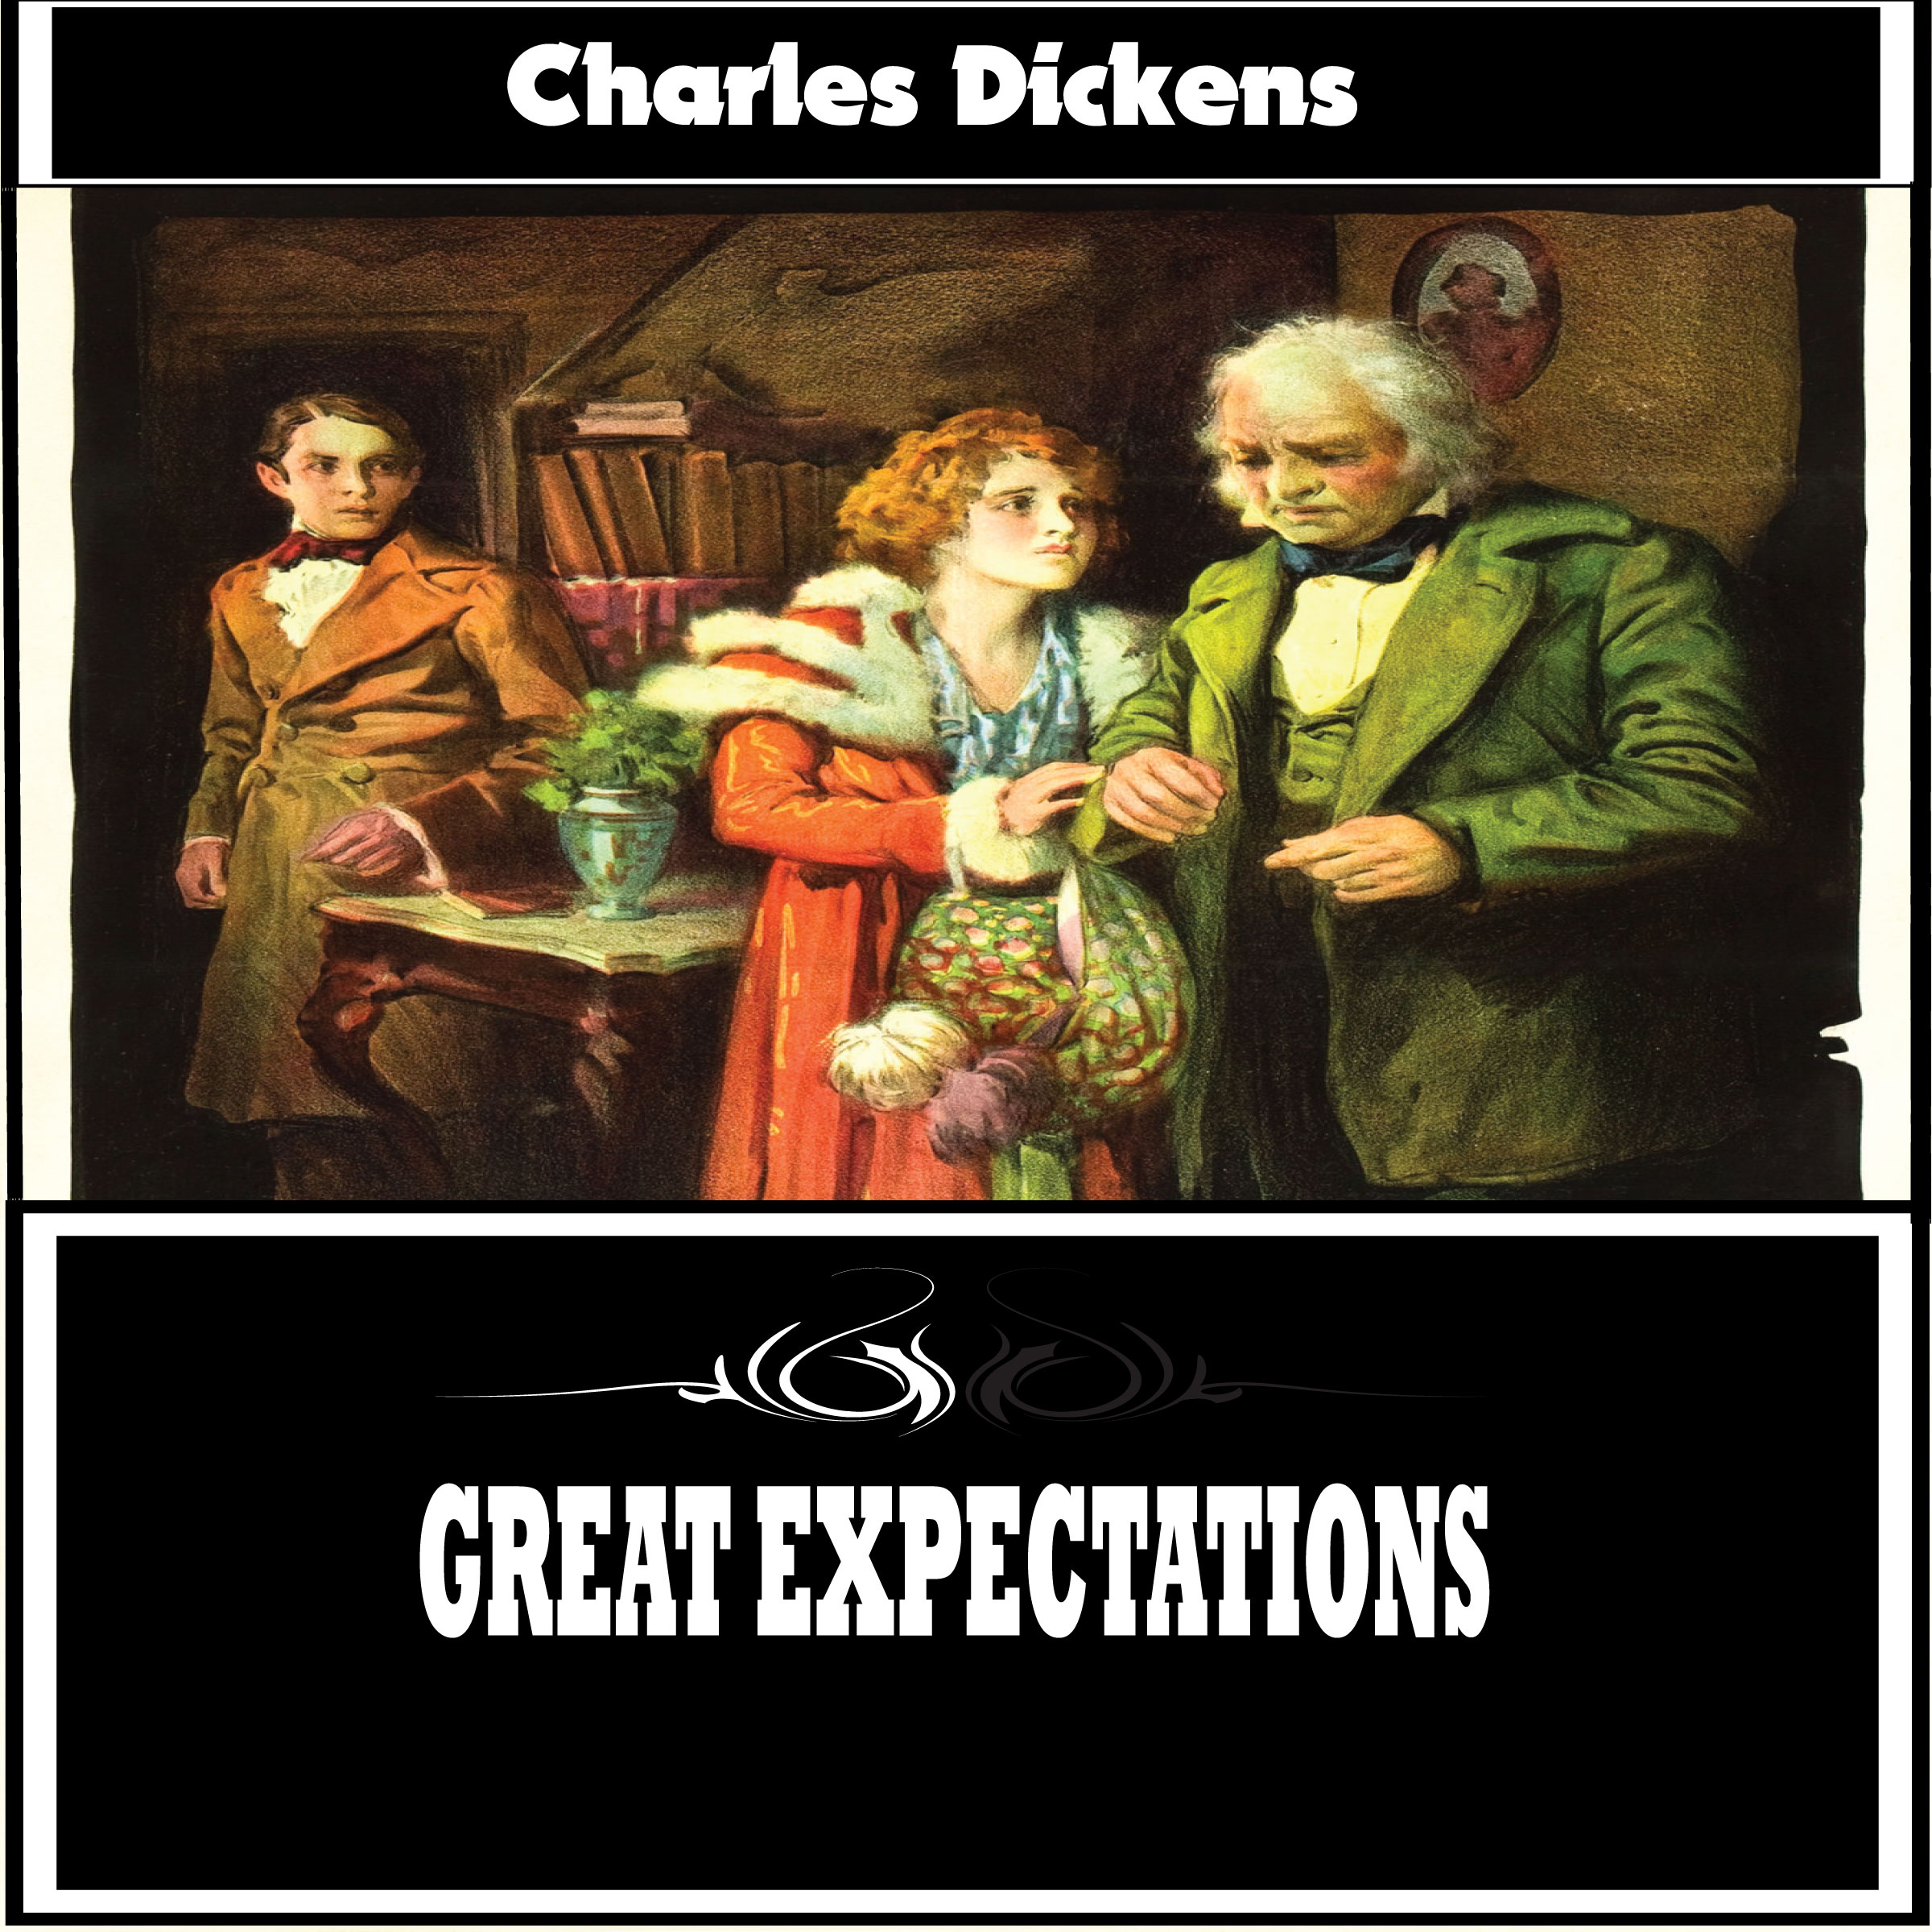 Machine-like qualities in dicken's great expectations